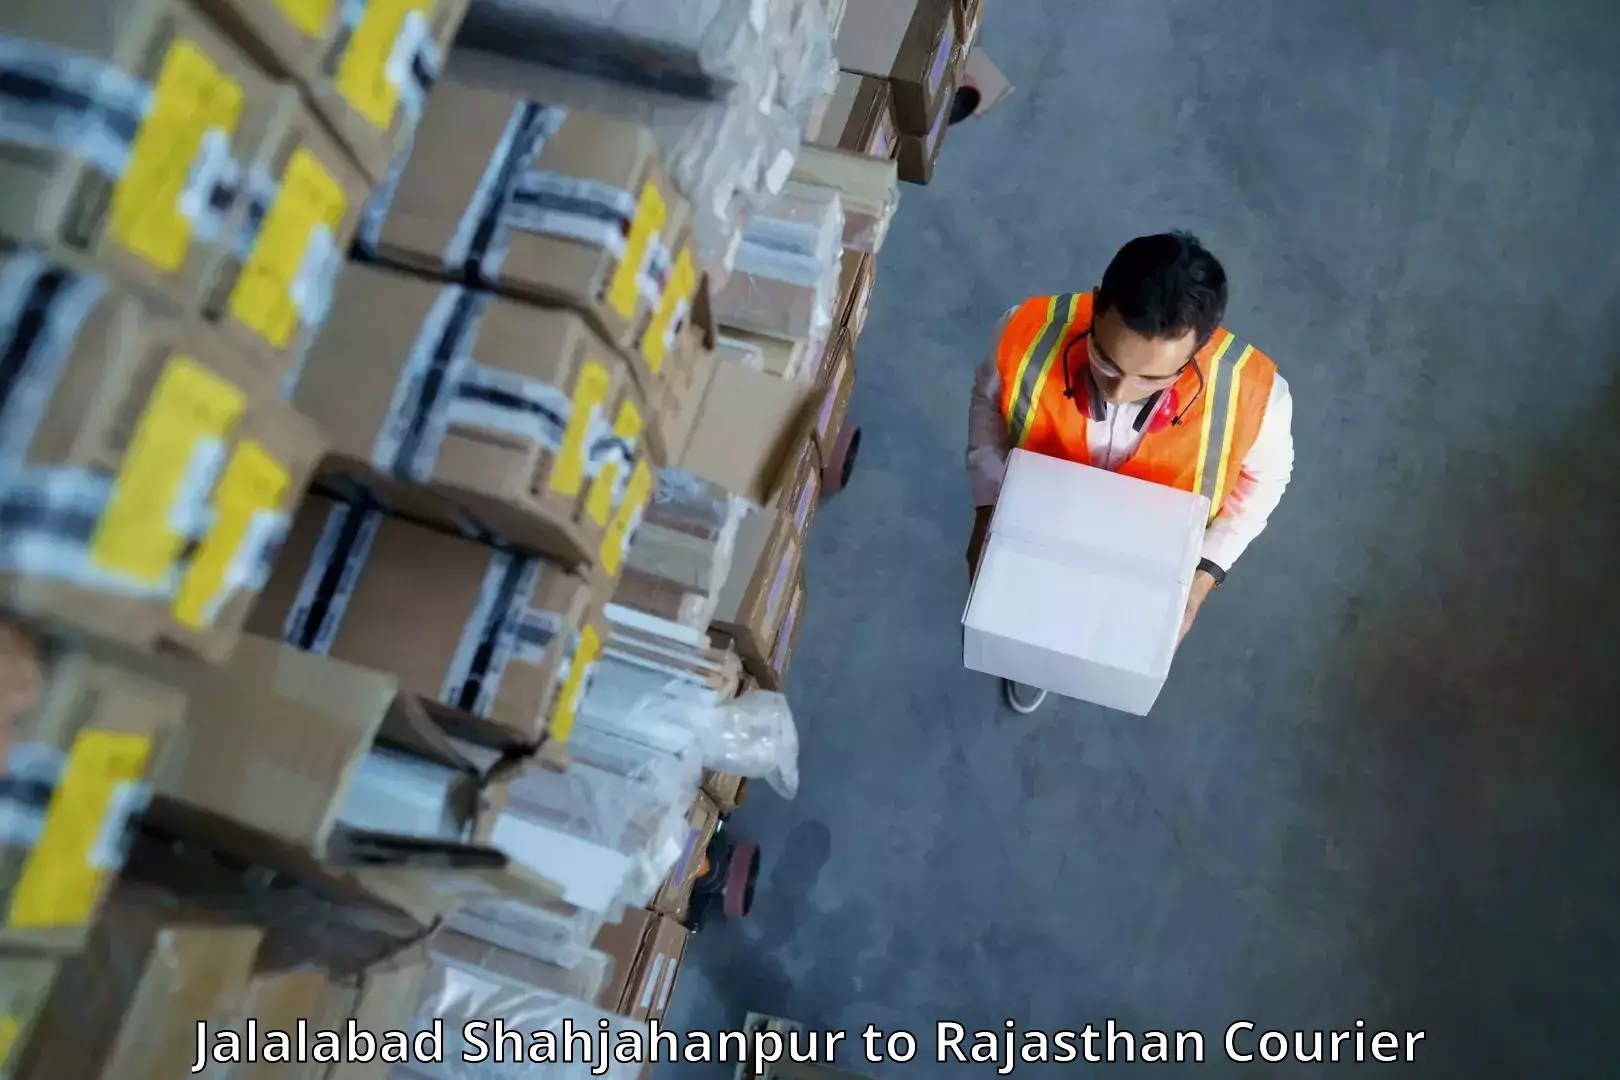 Scalable shipping solutions Jalalabad Shahjahanpur to Udaipurwati